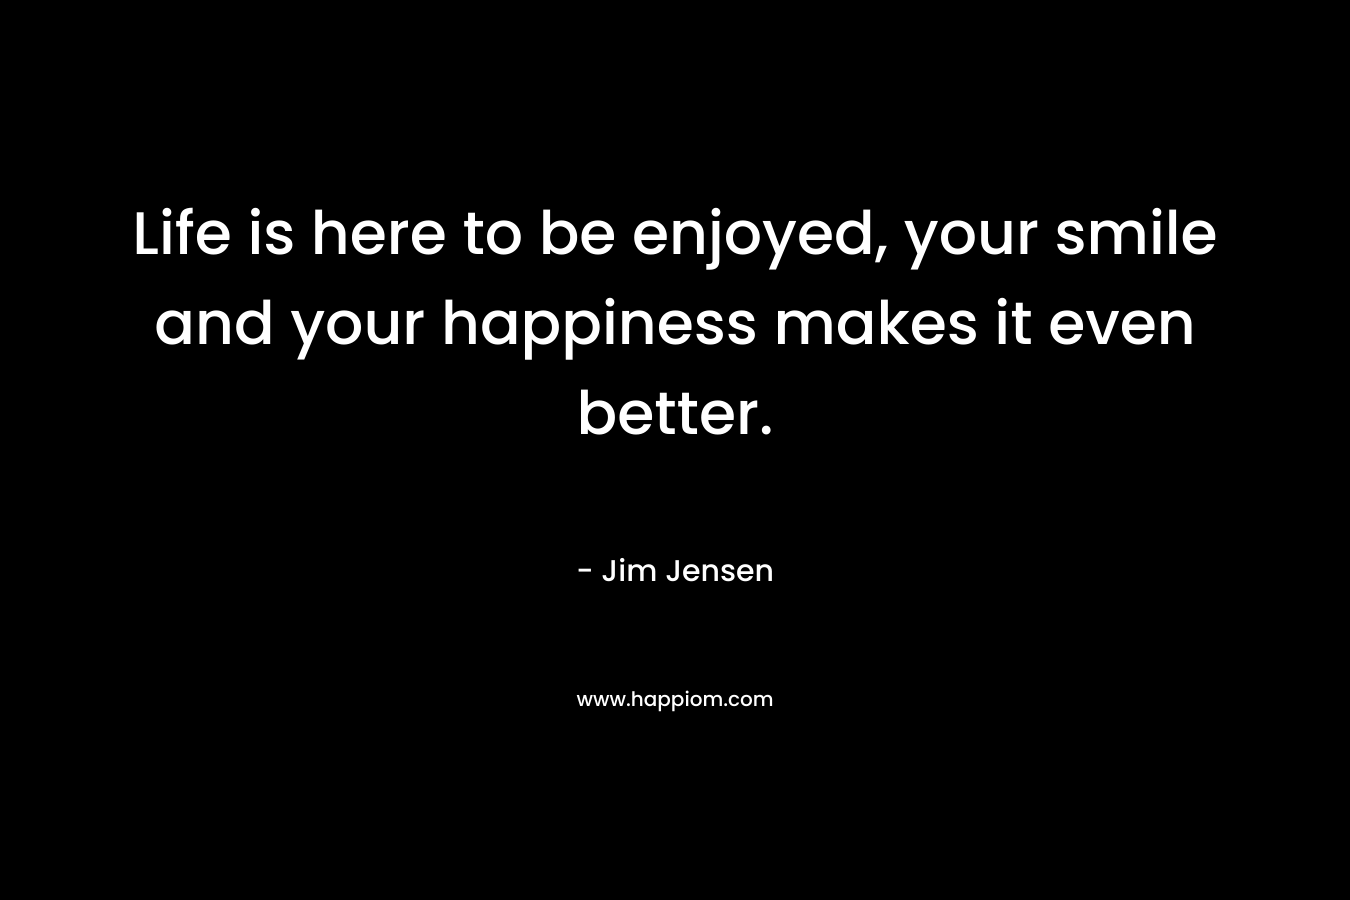 Life is here to be enjoyed, your smile and your happiness makes it even better. – Jim Jensen